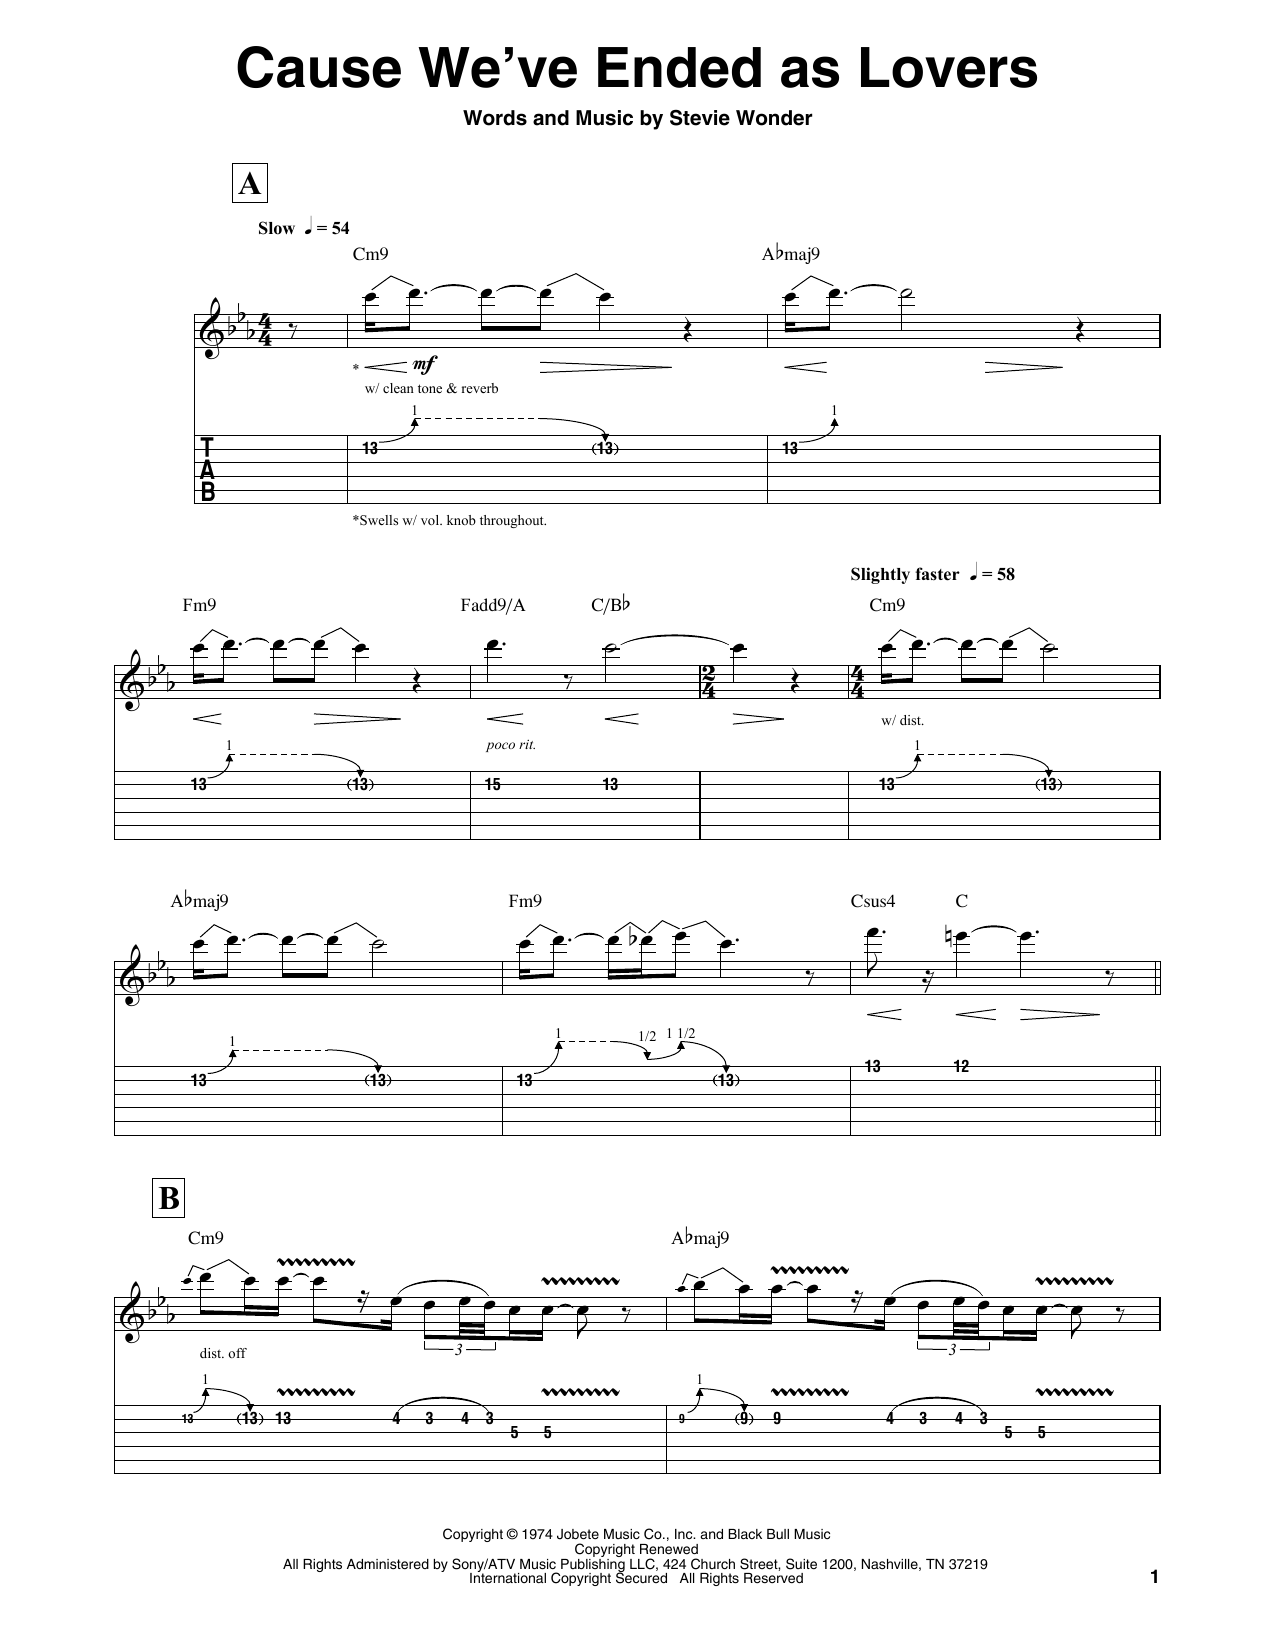 Chieli Minucci Cause We've Ended As Lovers sheet music notes and chords. Download Printable PDF.